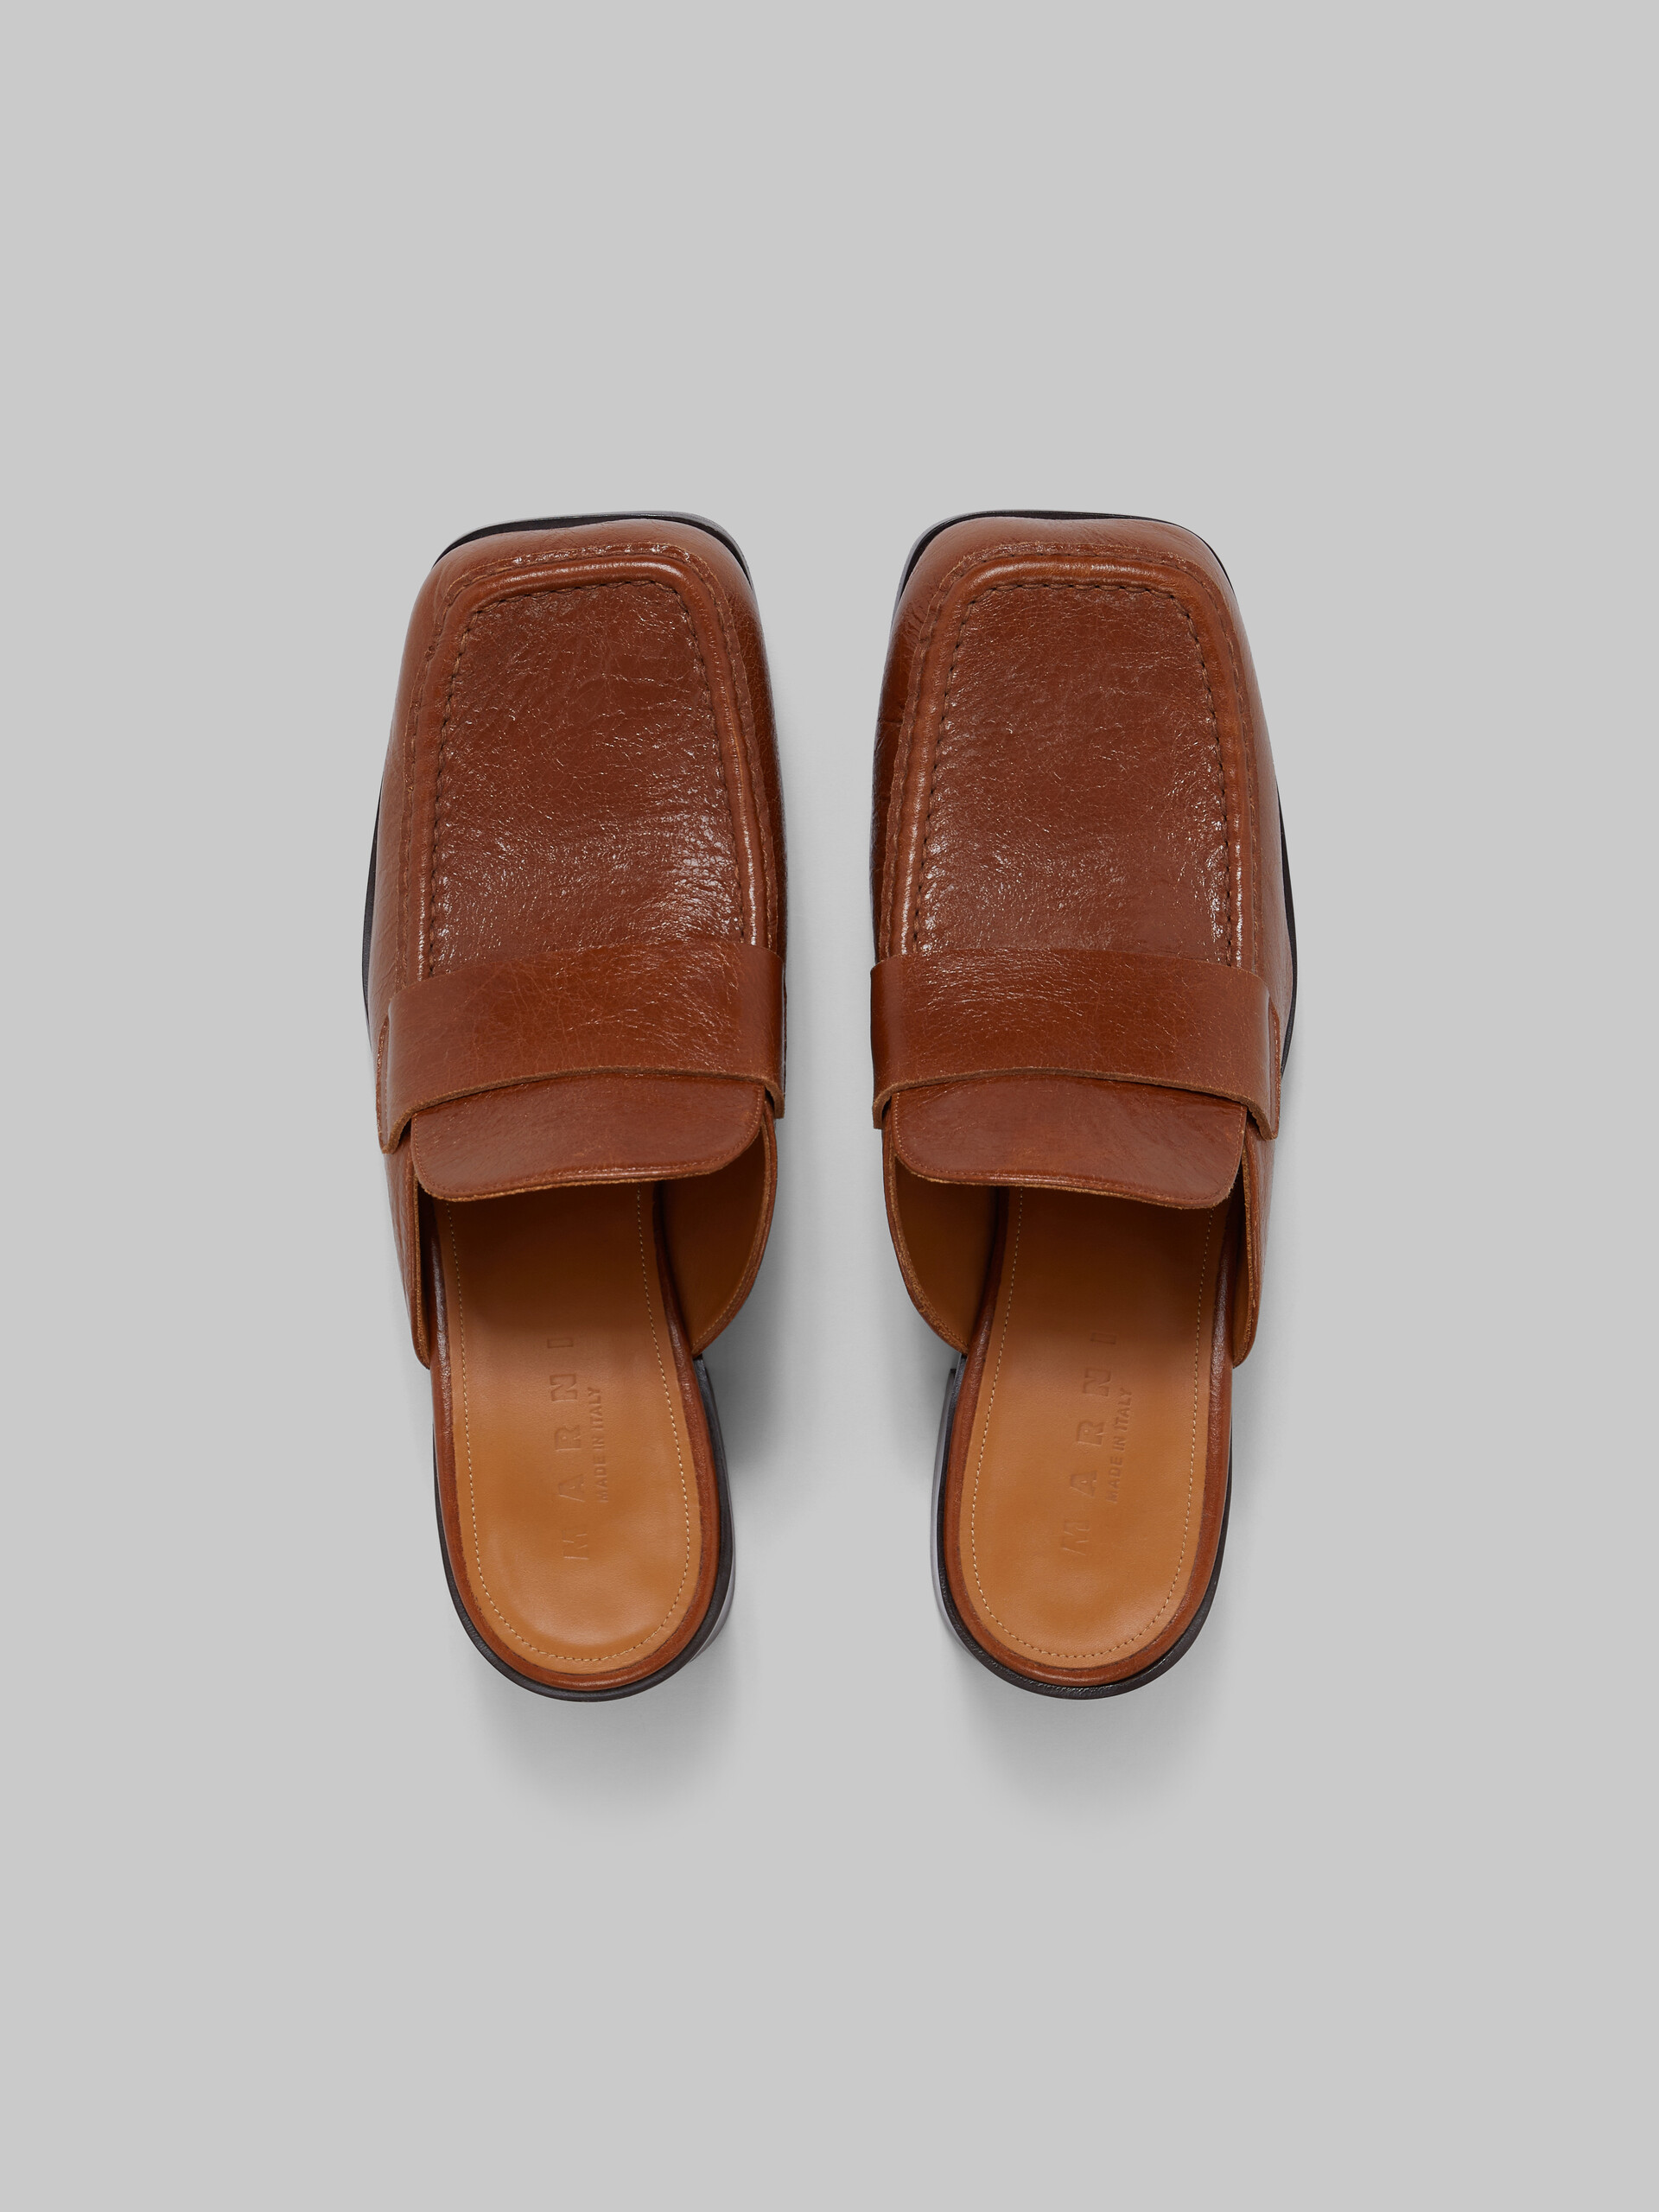 Brown leather heeled mule - Clogs - Image 4